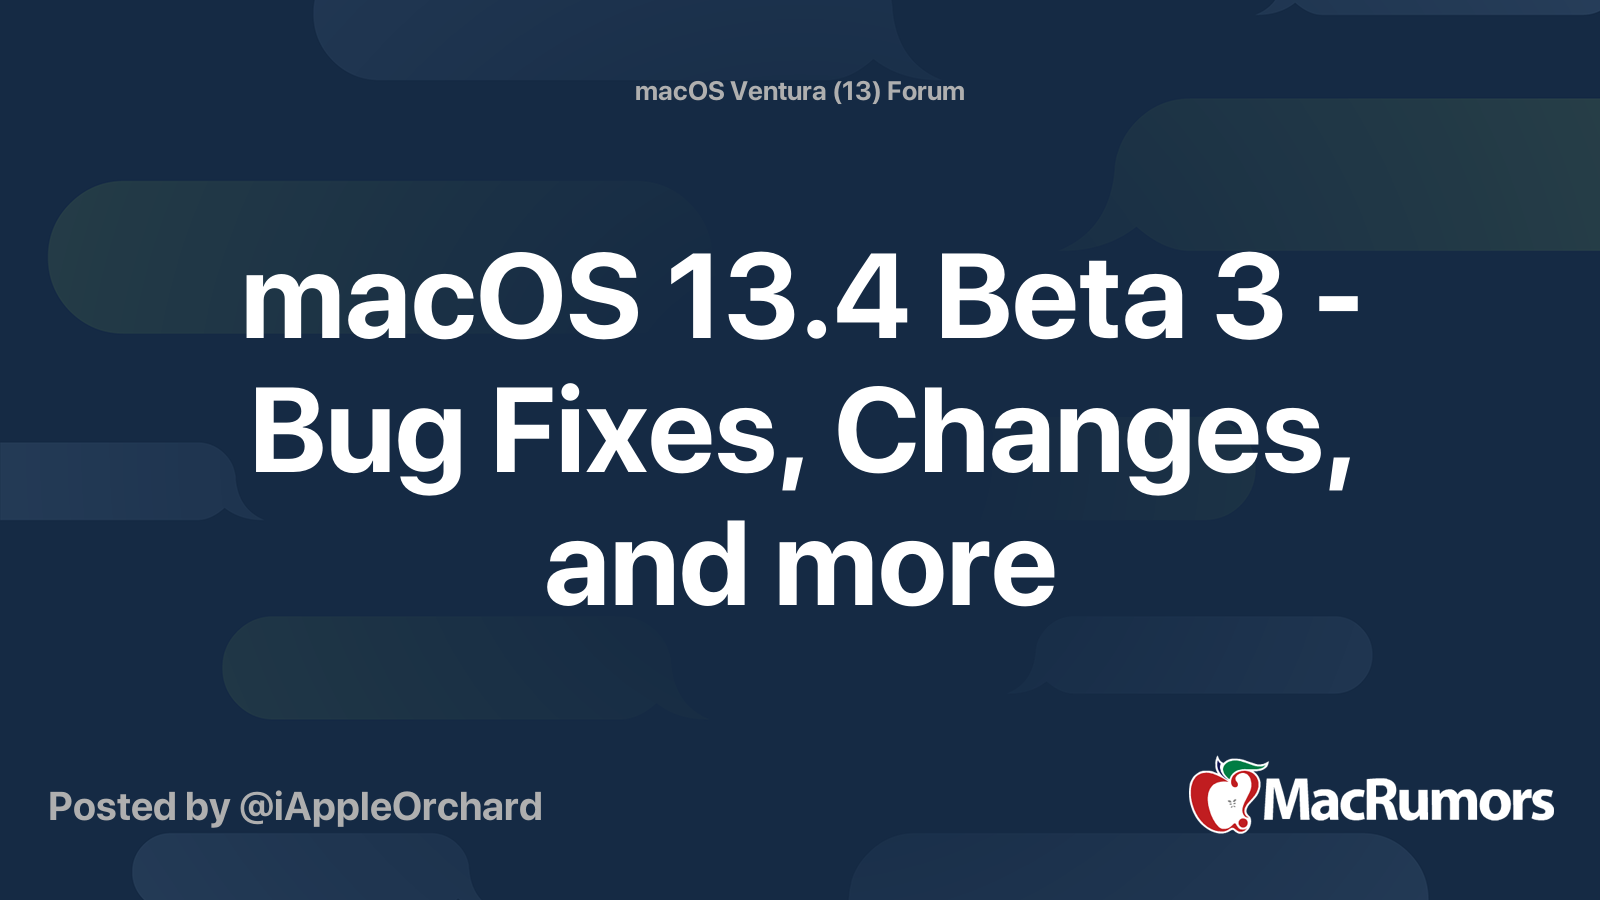 macos-13-4-beta-3-bug-fixes-changes-and-more